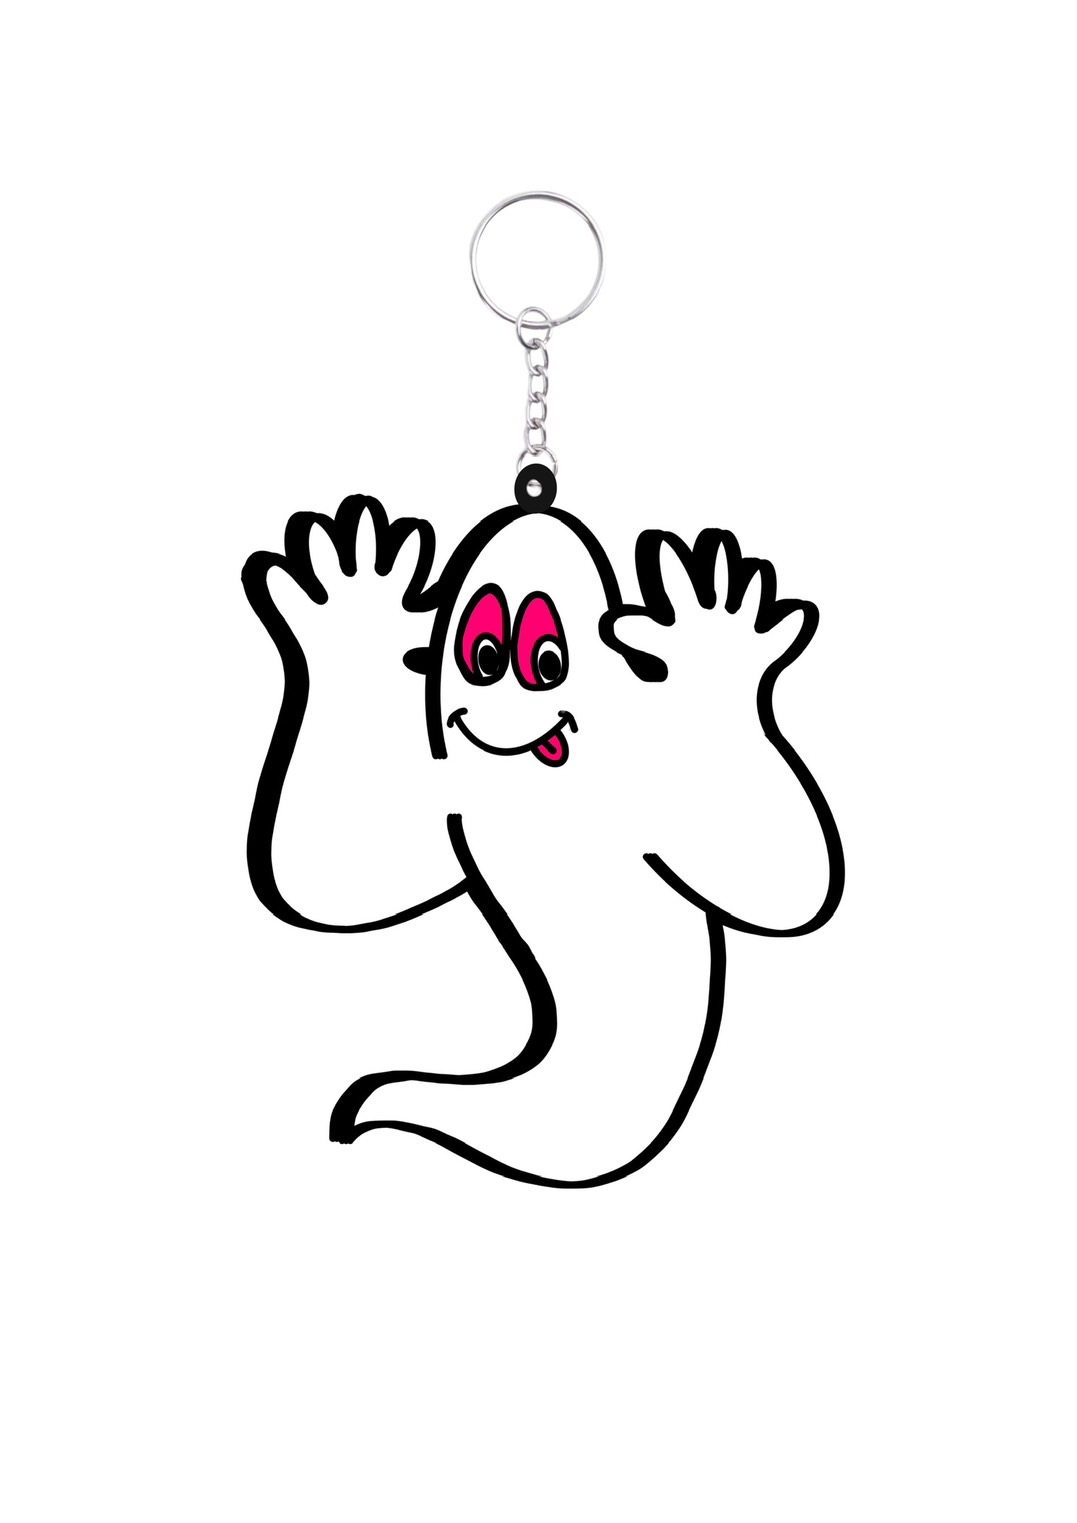 HIGHOST NEW GHOST KEY RING